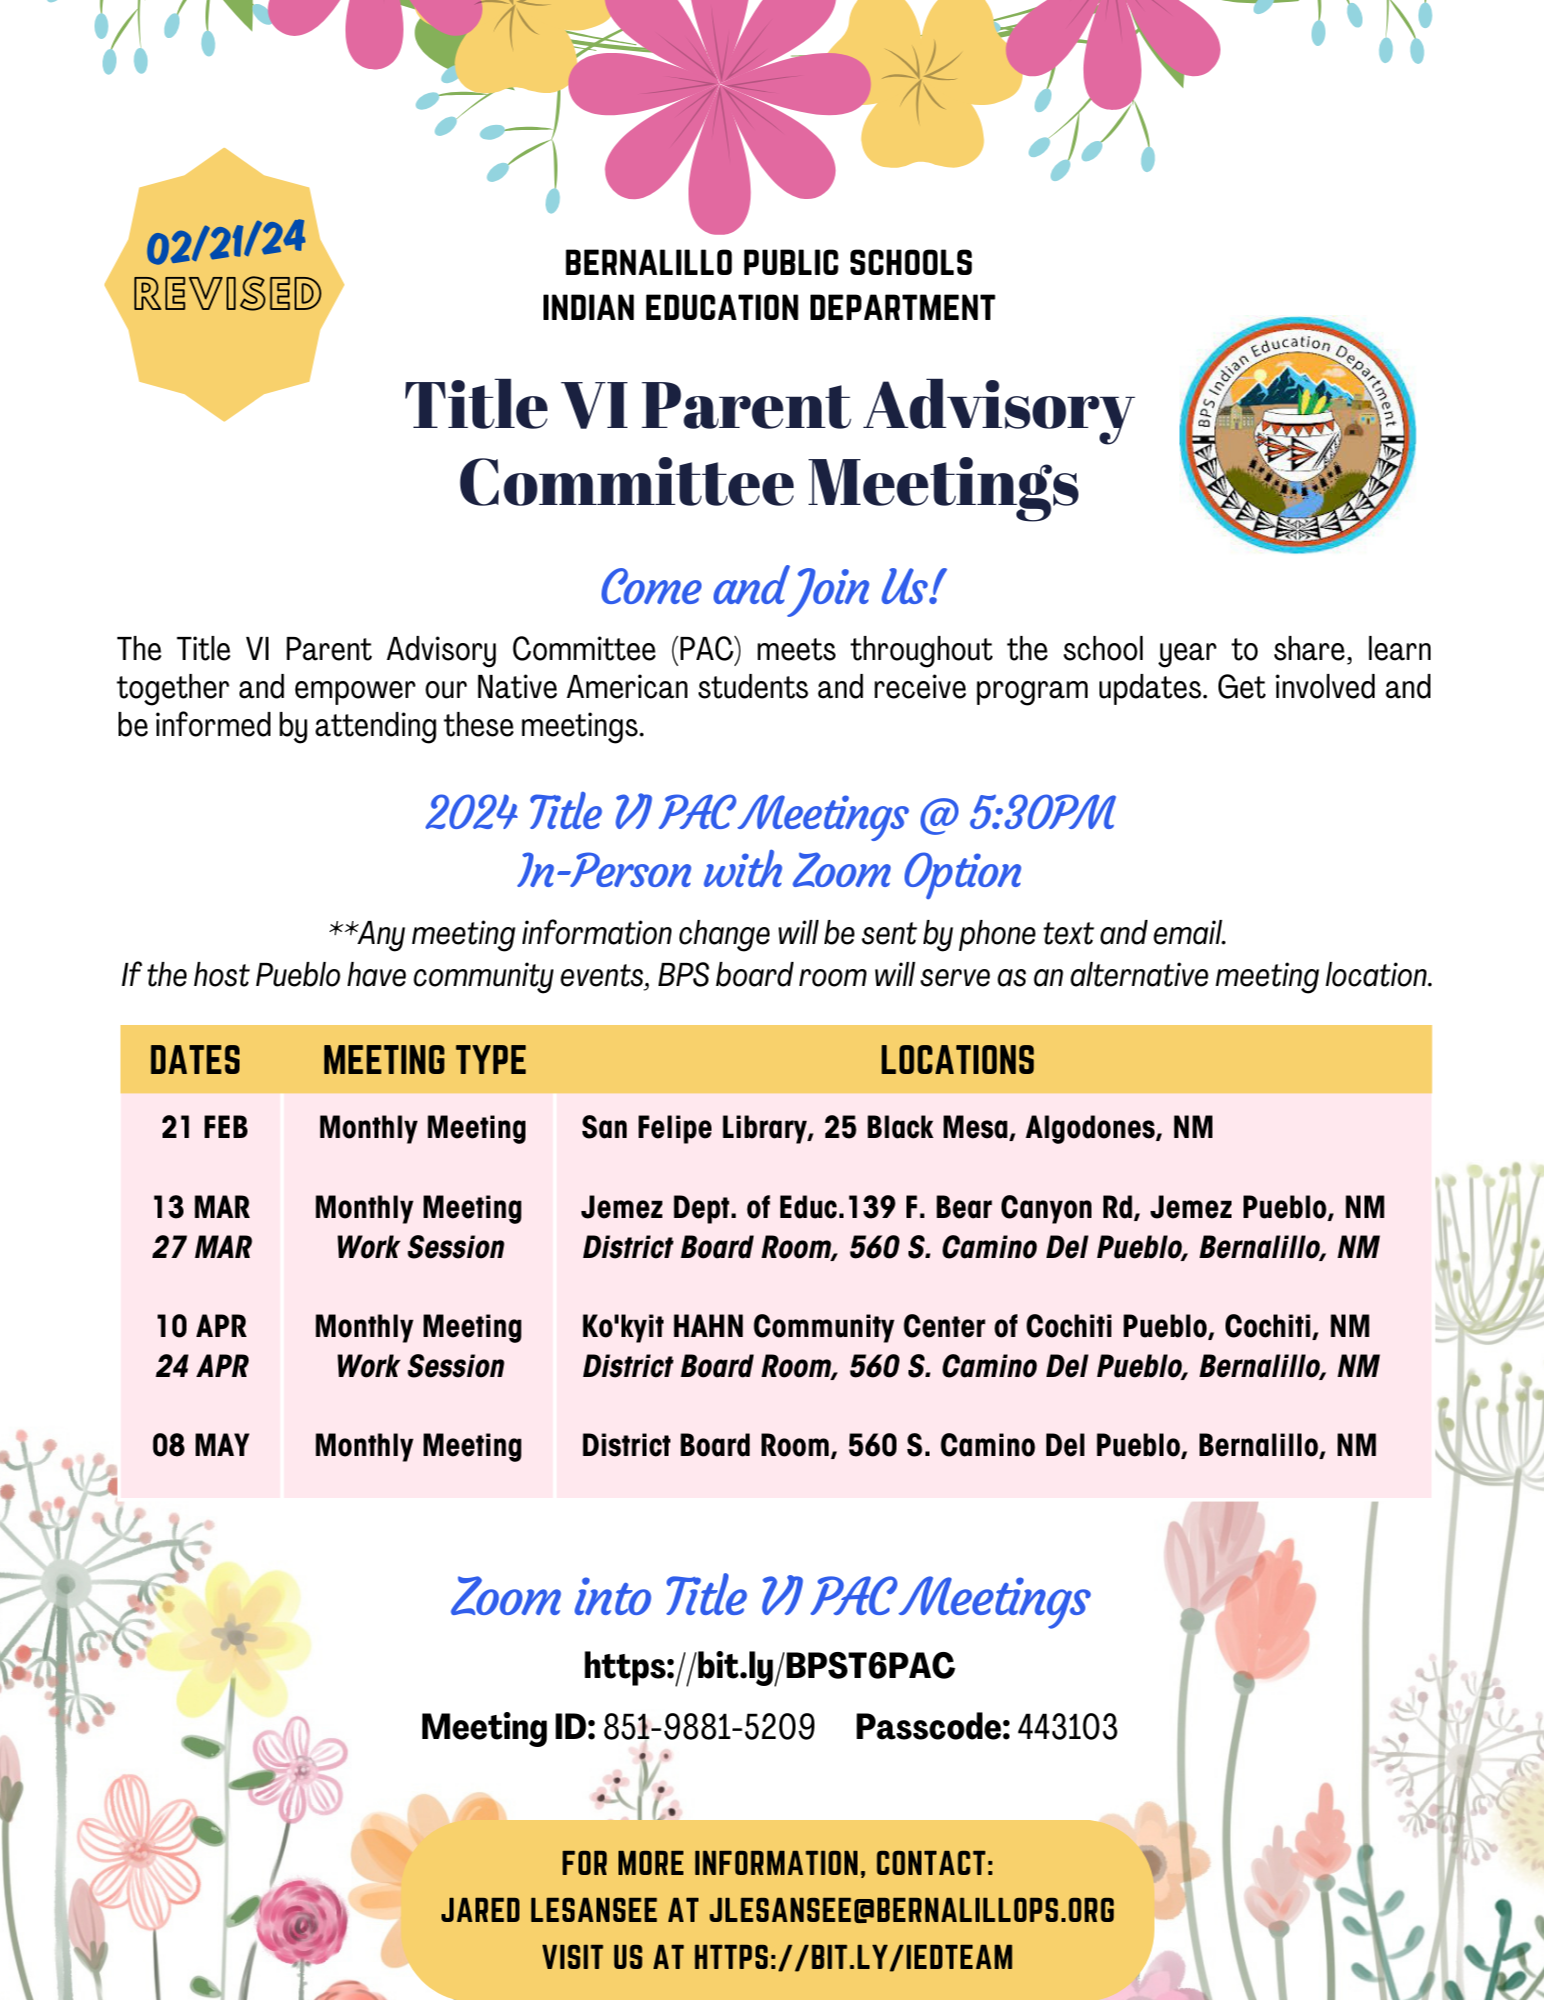 Revised 2024 Title VI PAC Meeting Dates